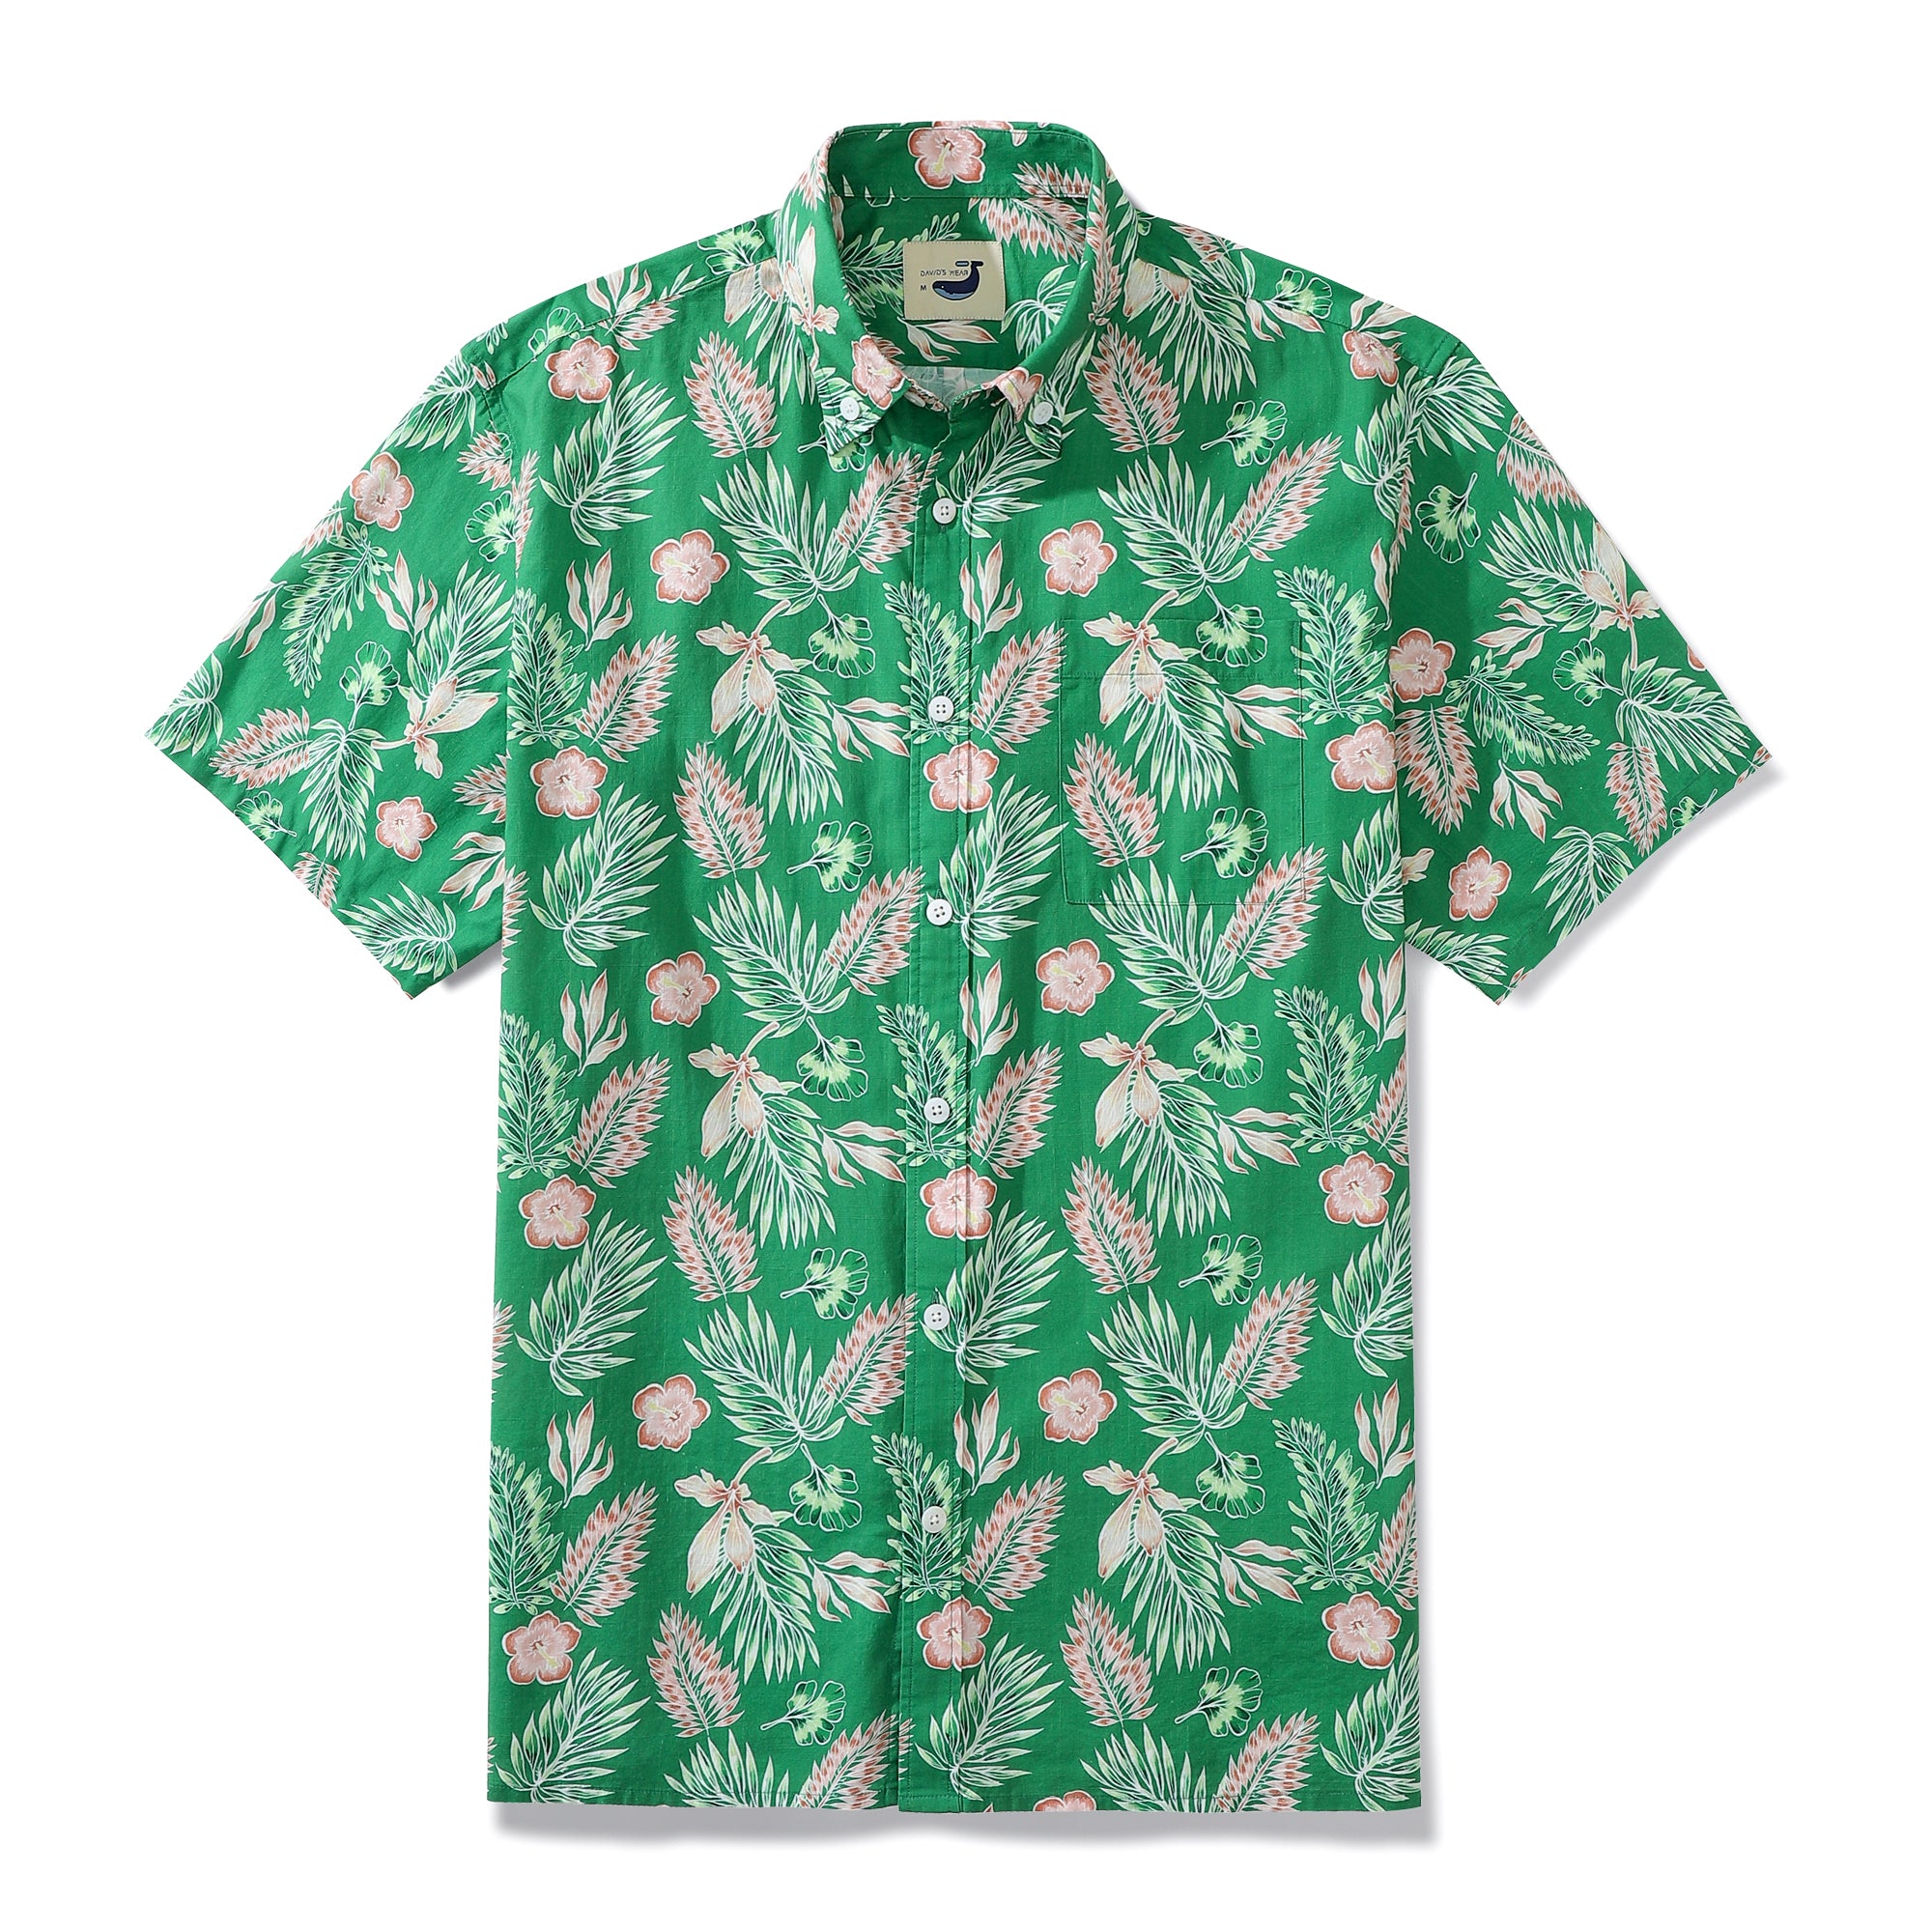 Green Tropical Hand-painted Floral Pattern Men's Button-down Shirt